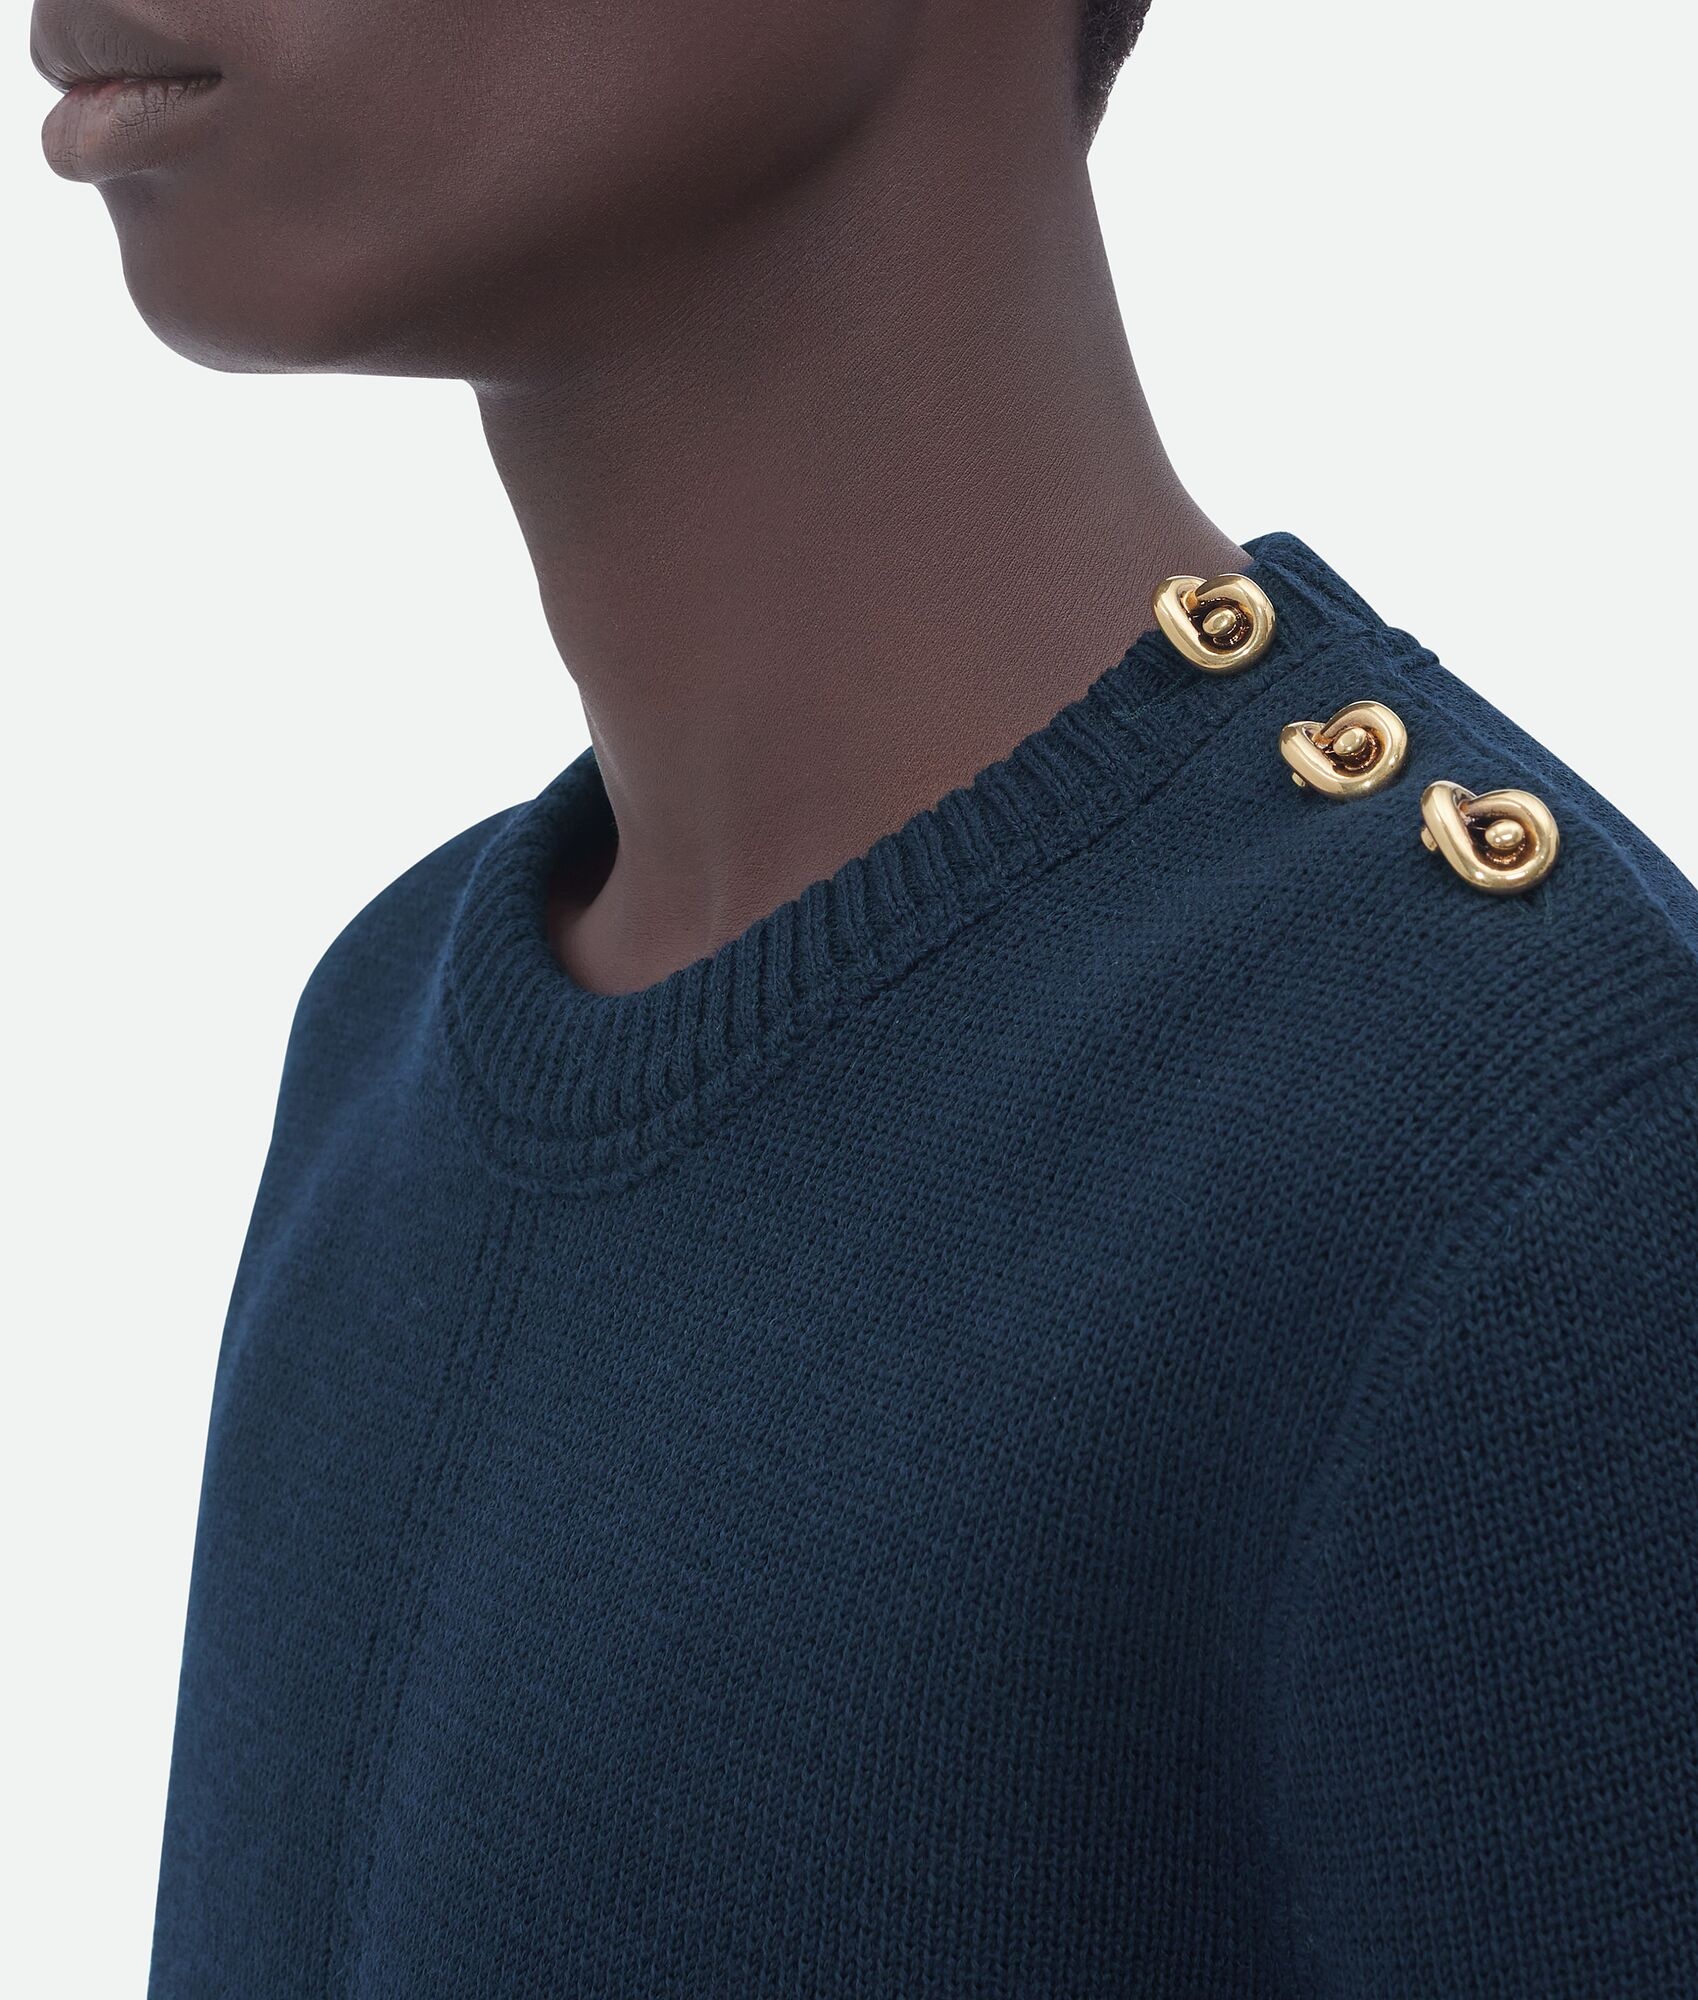 wool jumper with metal knot buttons - 4